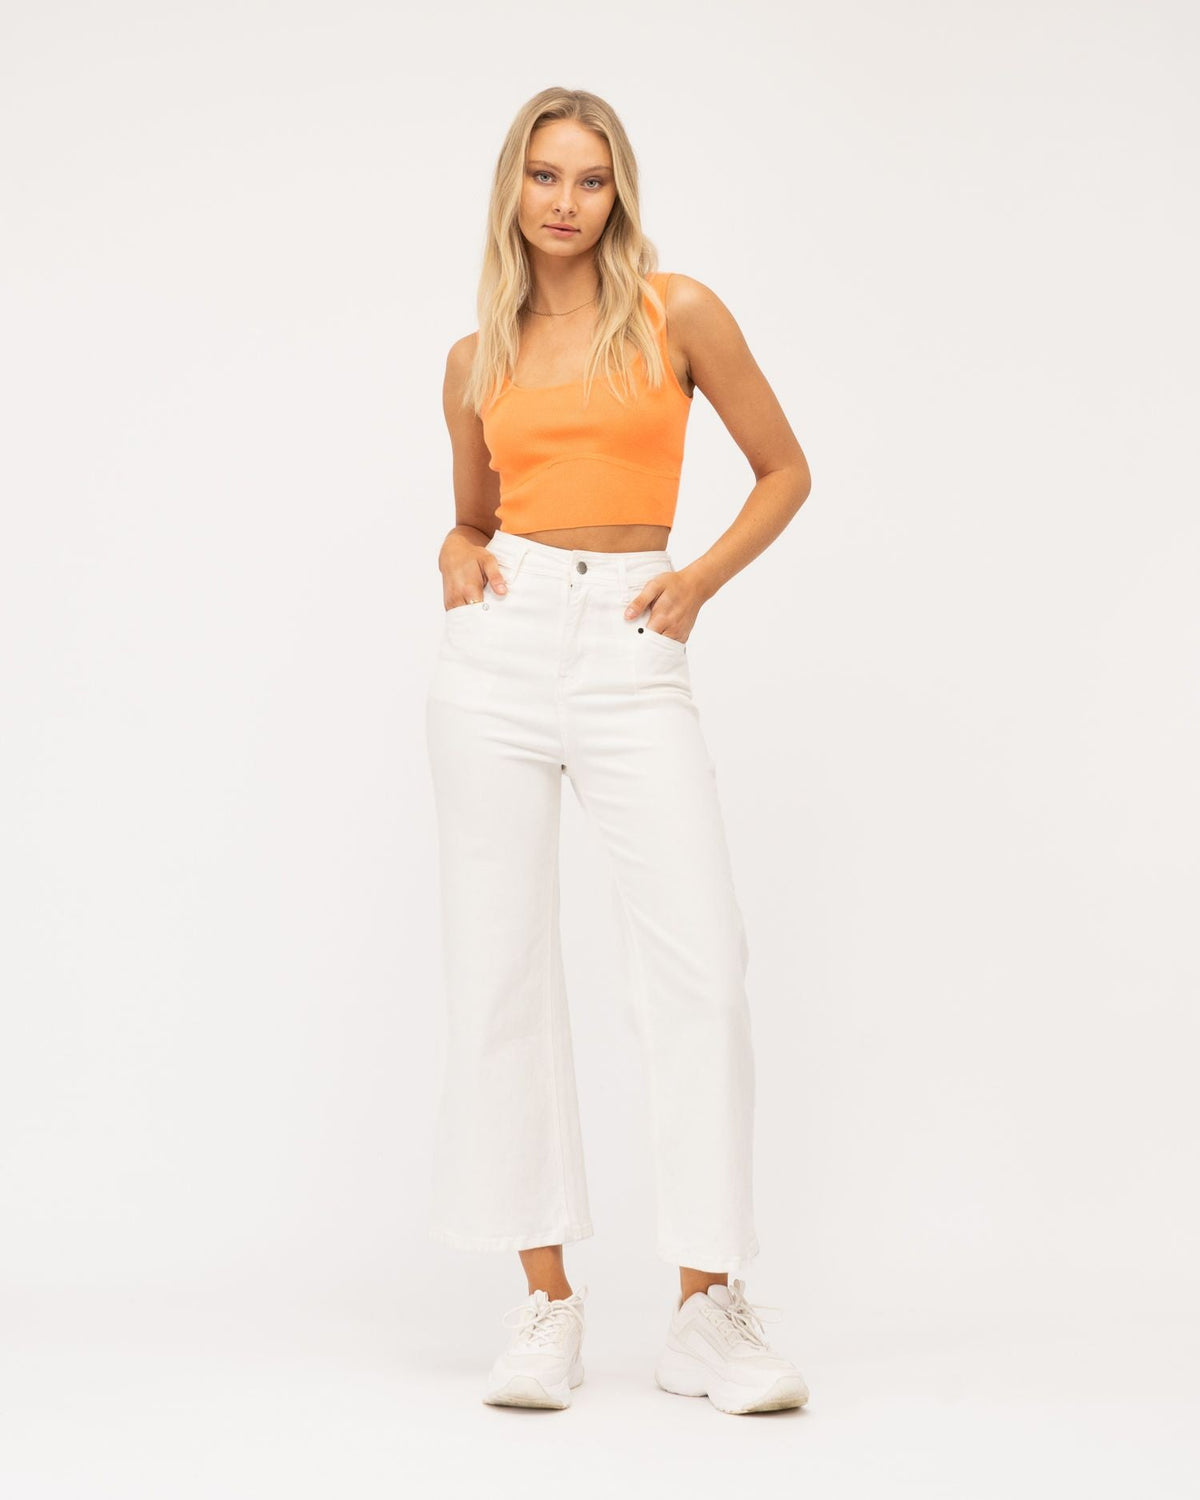 A girl wearing orange top and white cropped wide leg jeans from Paper Heart collection designed by Global Fashion House.